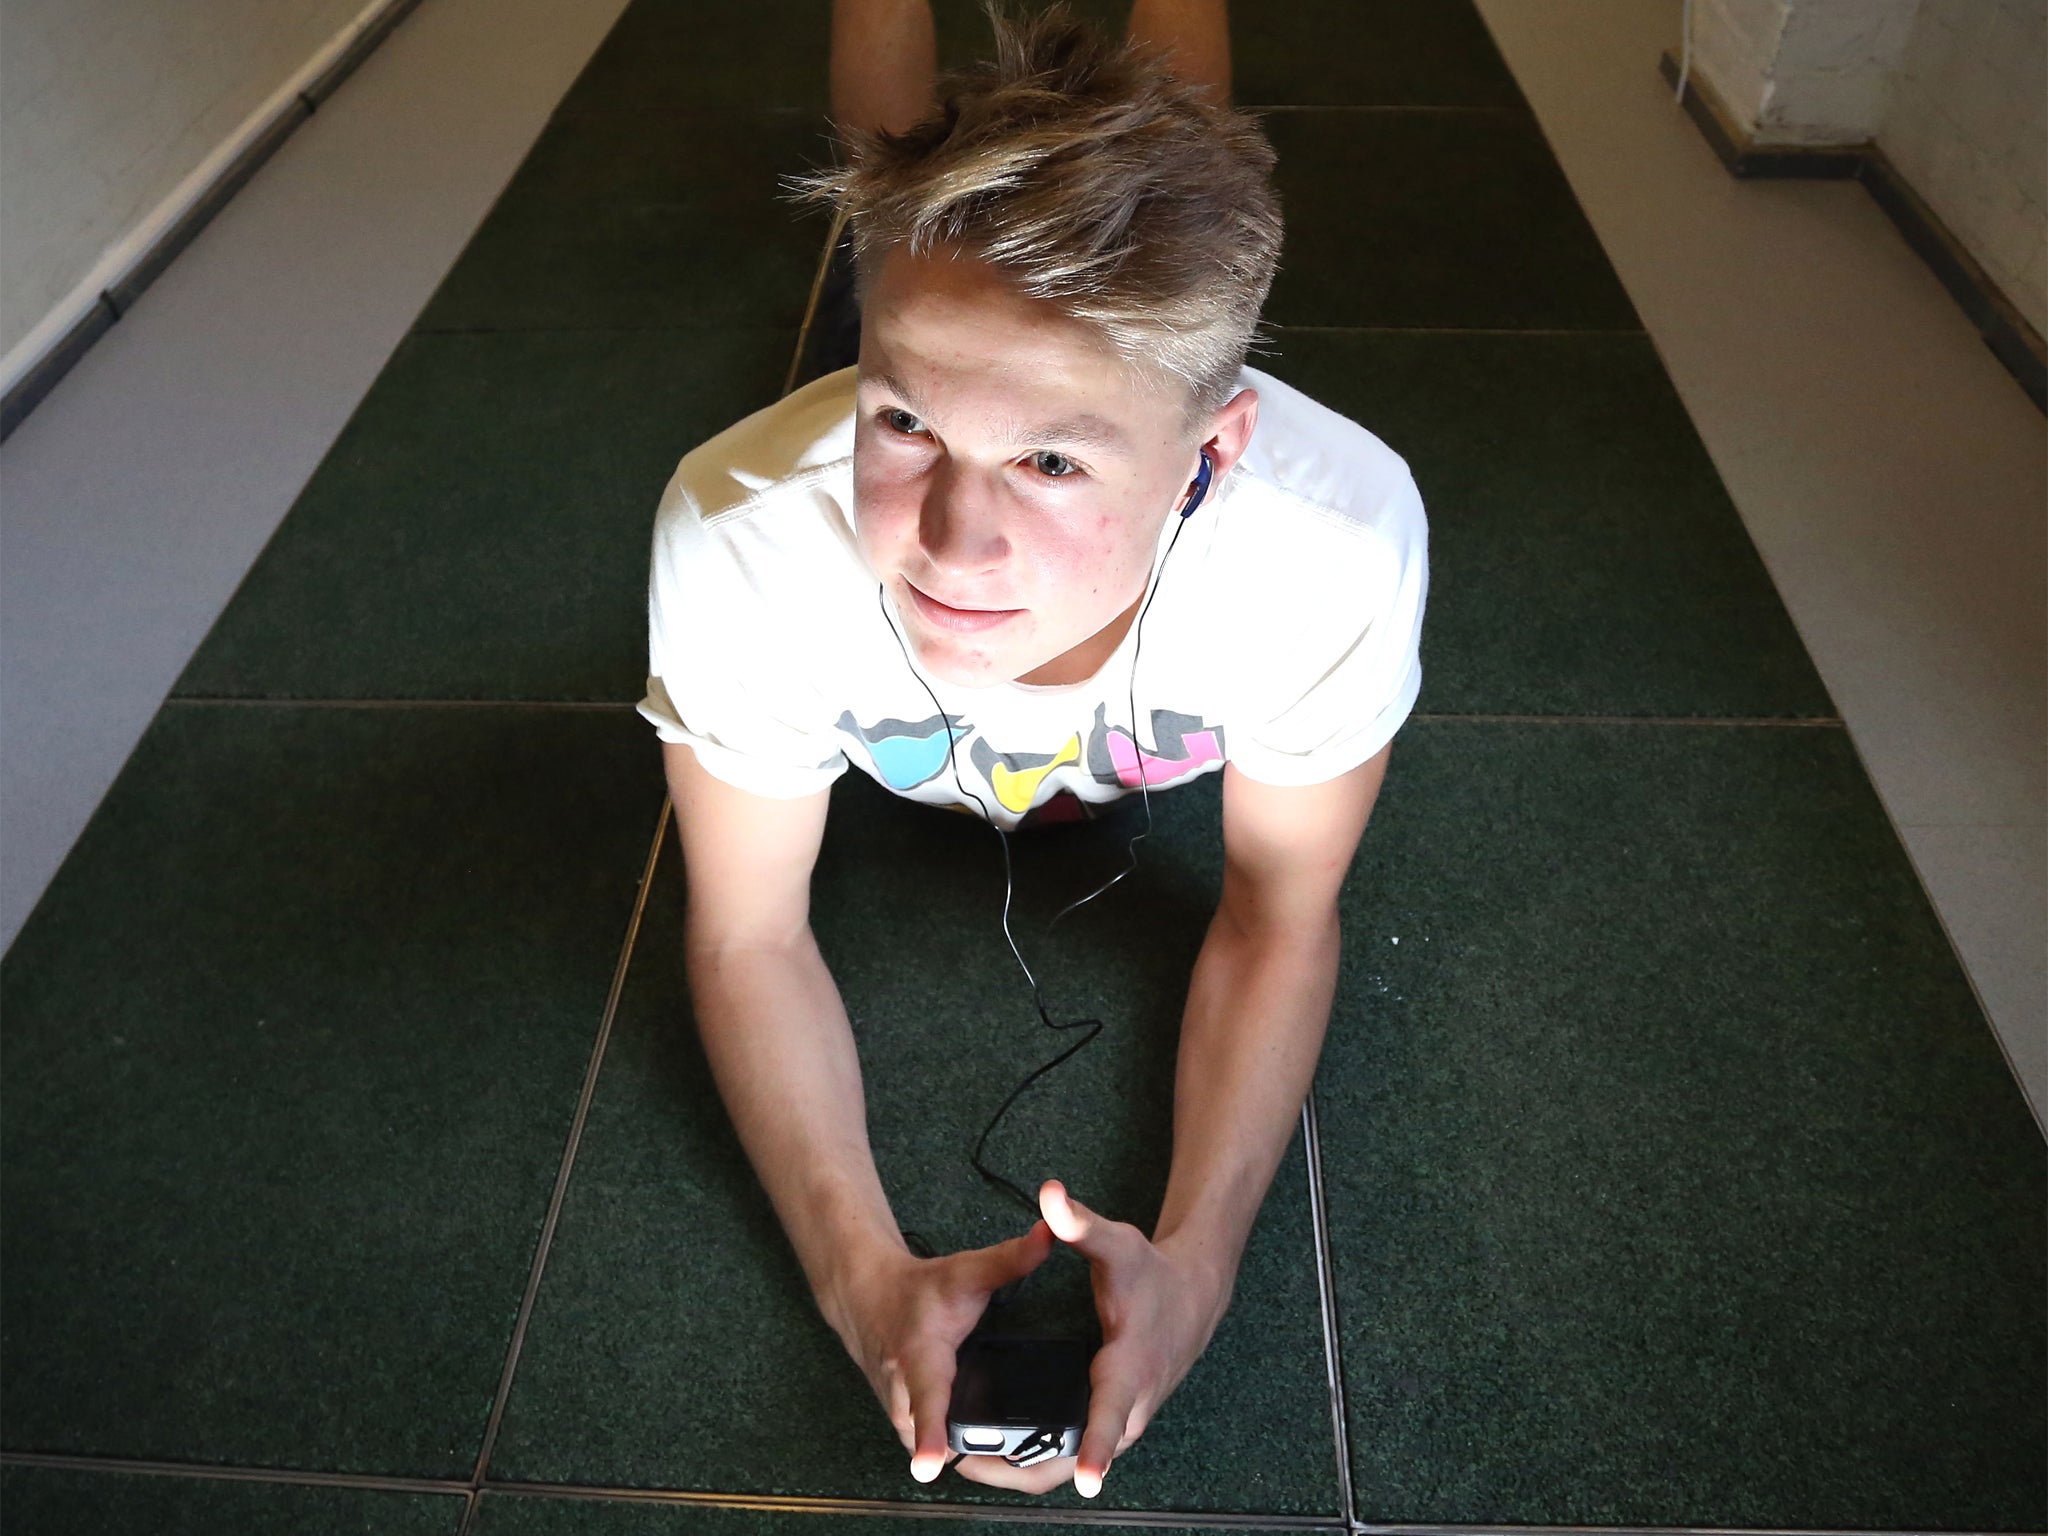 Zach Cole, 17, listens to his iPod which has been charged using energy generated from the kinetic floor tiles